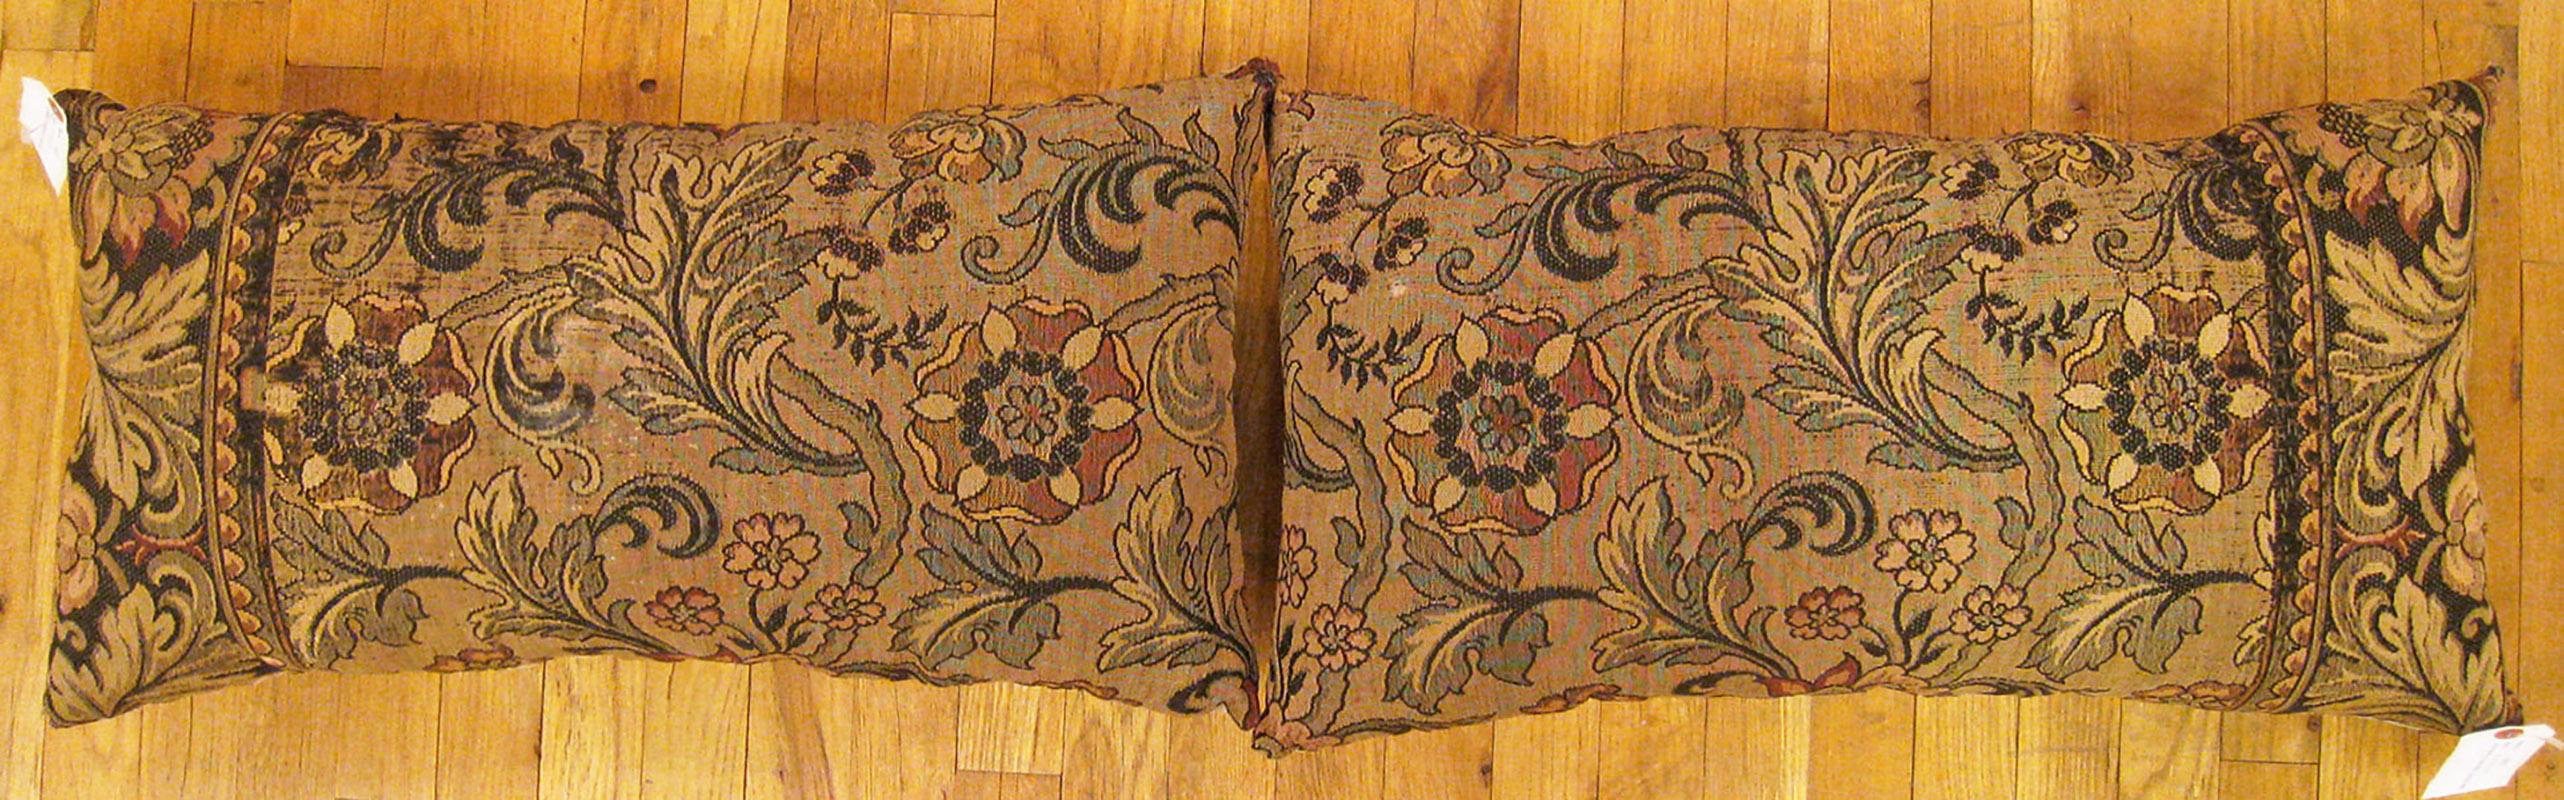 A pair of antique jacquard tapestry pillows ; size 1'3” x 2'2” each.

An antique decorative pillows with floral elements allover a brown central field, size 1'3